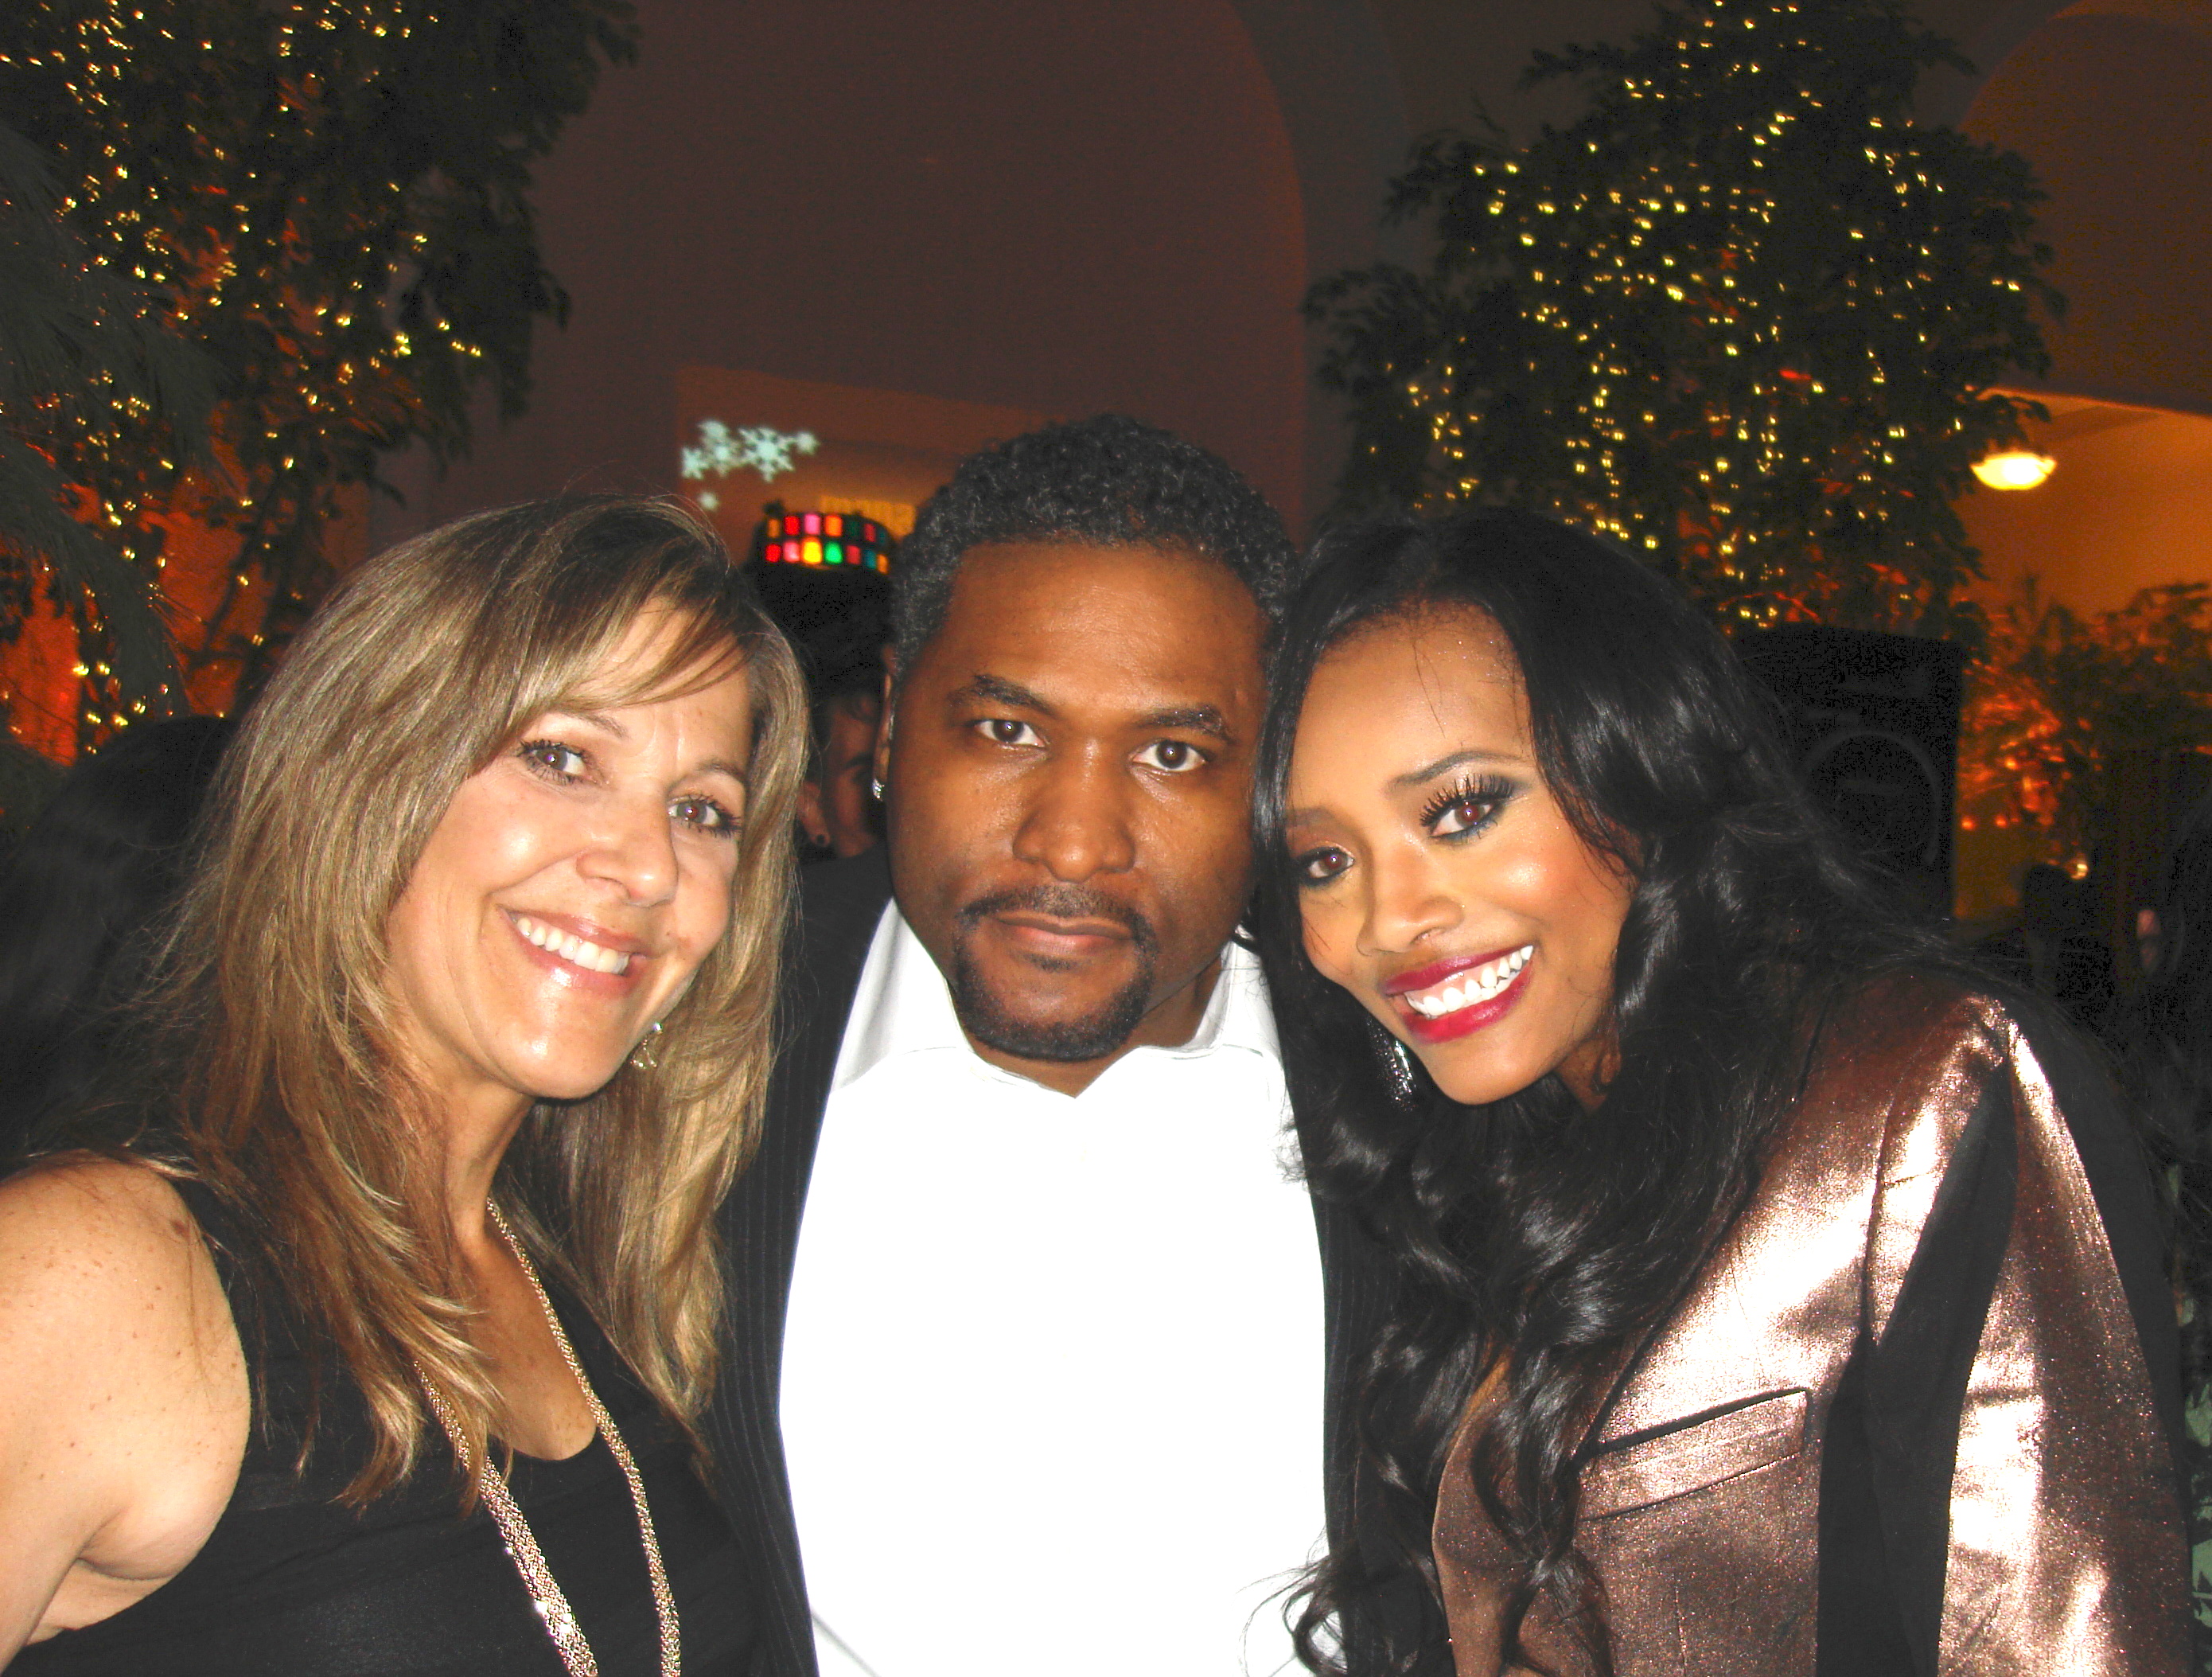 Karen Body, Spice Greene and Yandy Smith at Mona Scott-Young's 2013 Christmas party.